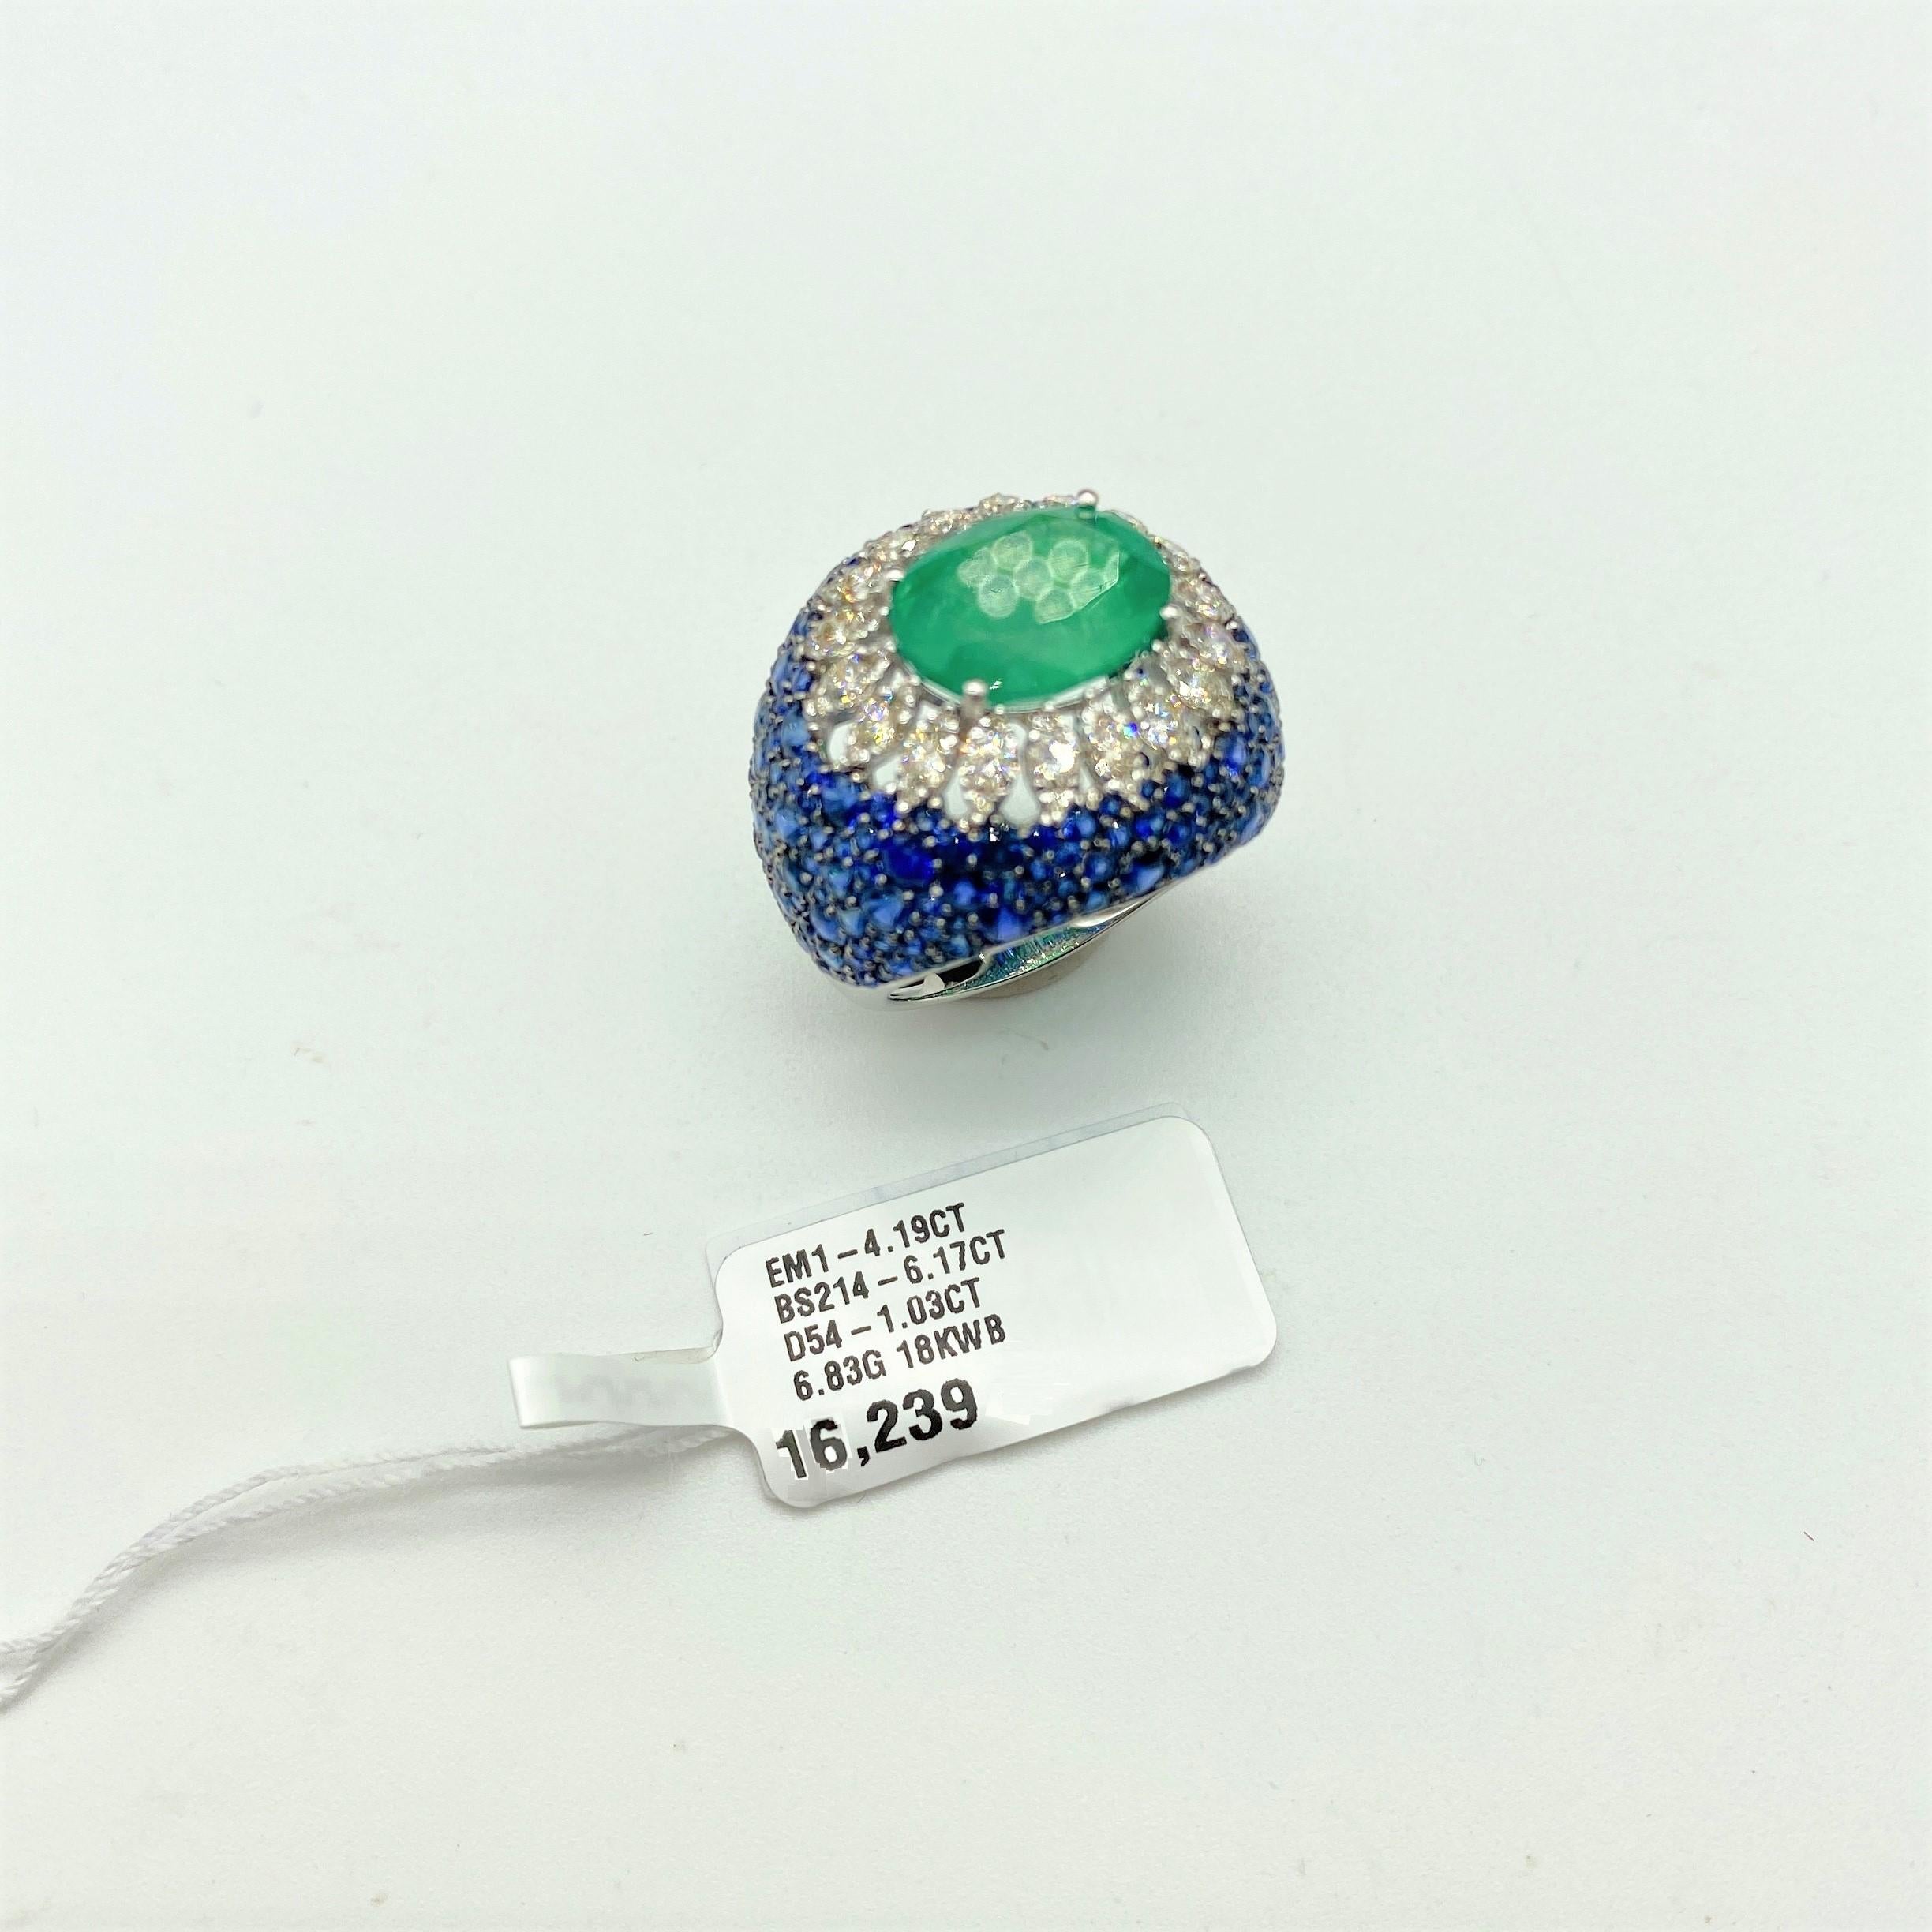 Taille mixte NWT $16, 239 Gold 18KT Gorgeous 11.50CT Emerald Blue Sapphire and Diamond Ring en vente